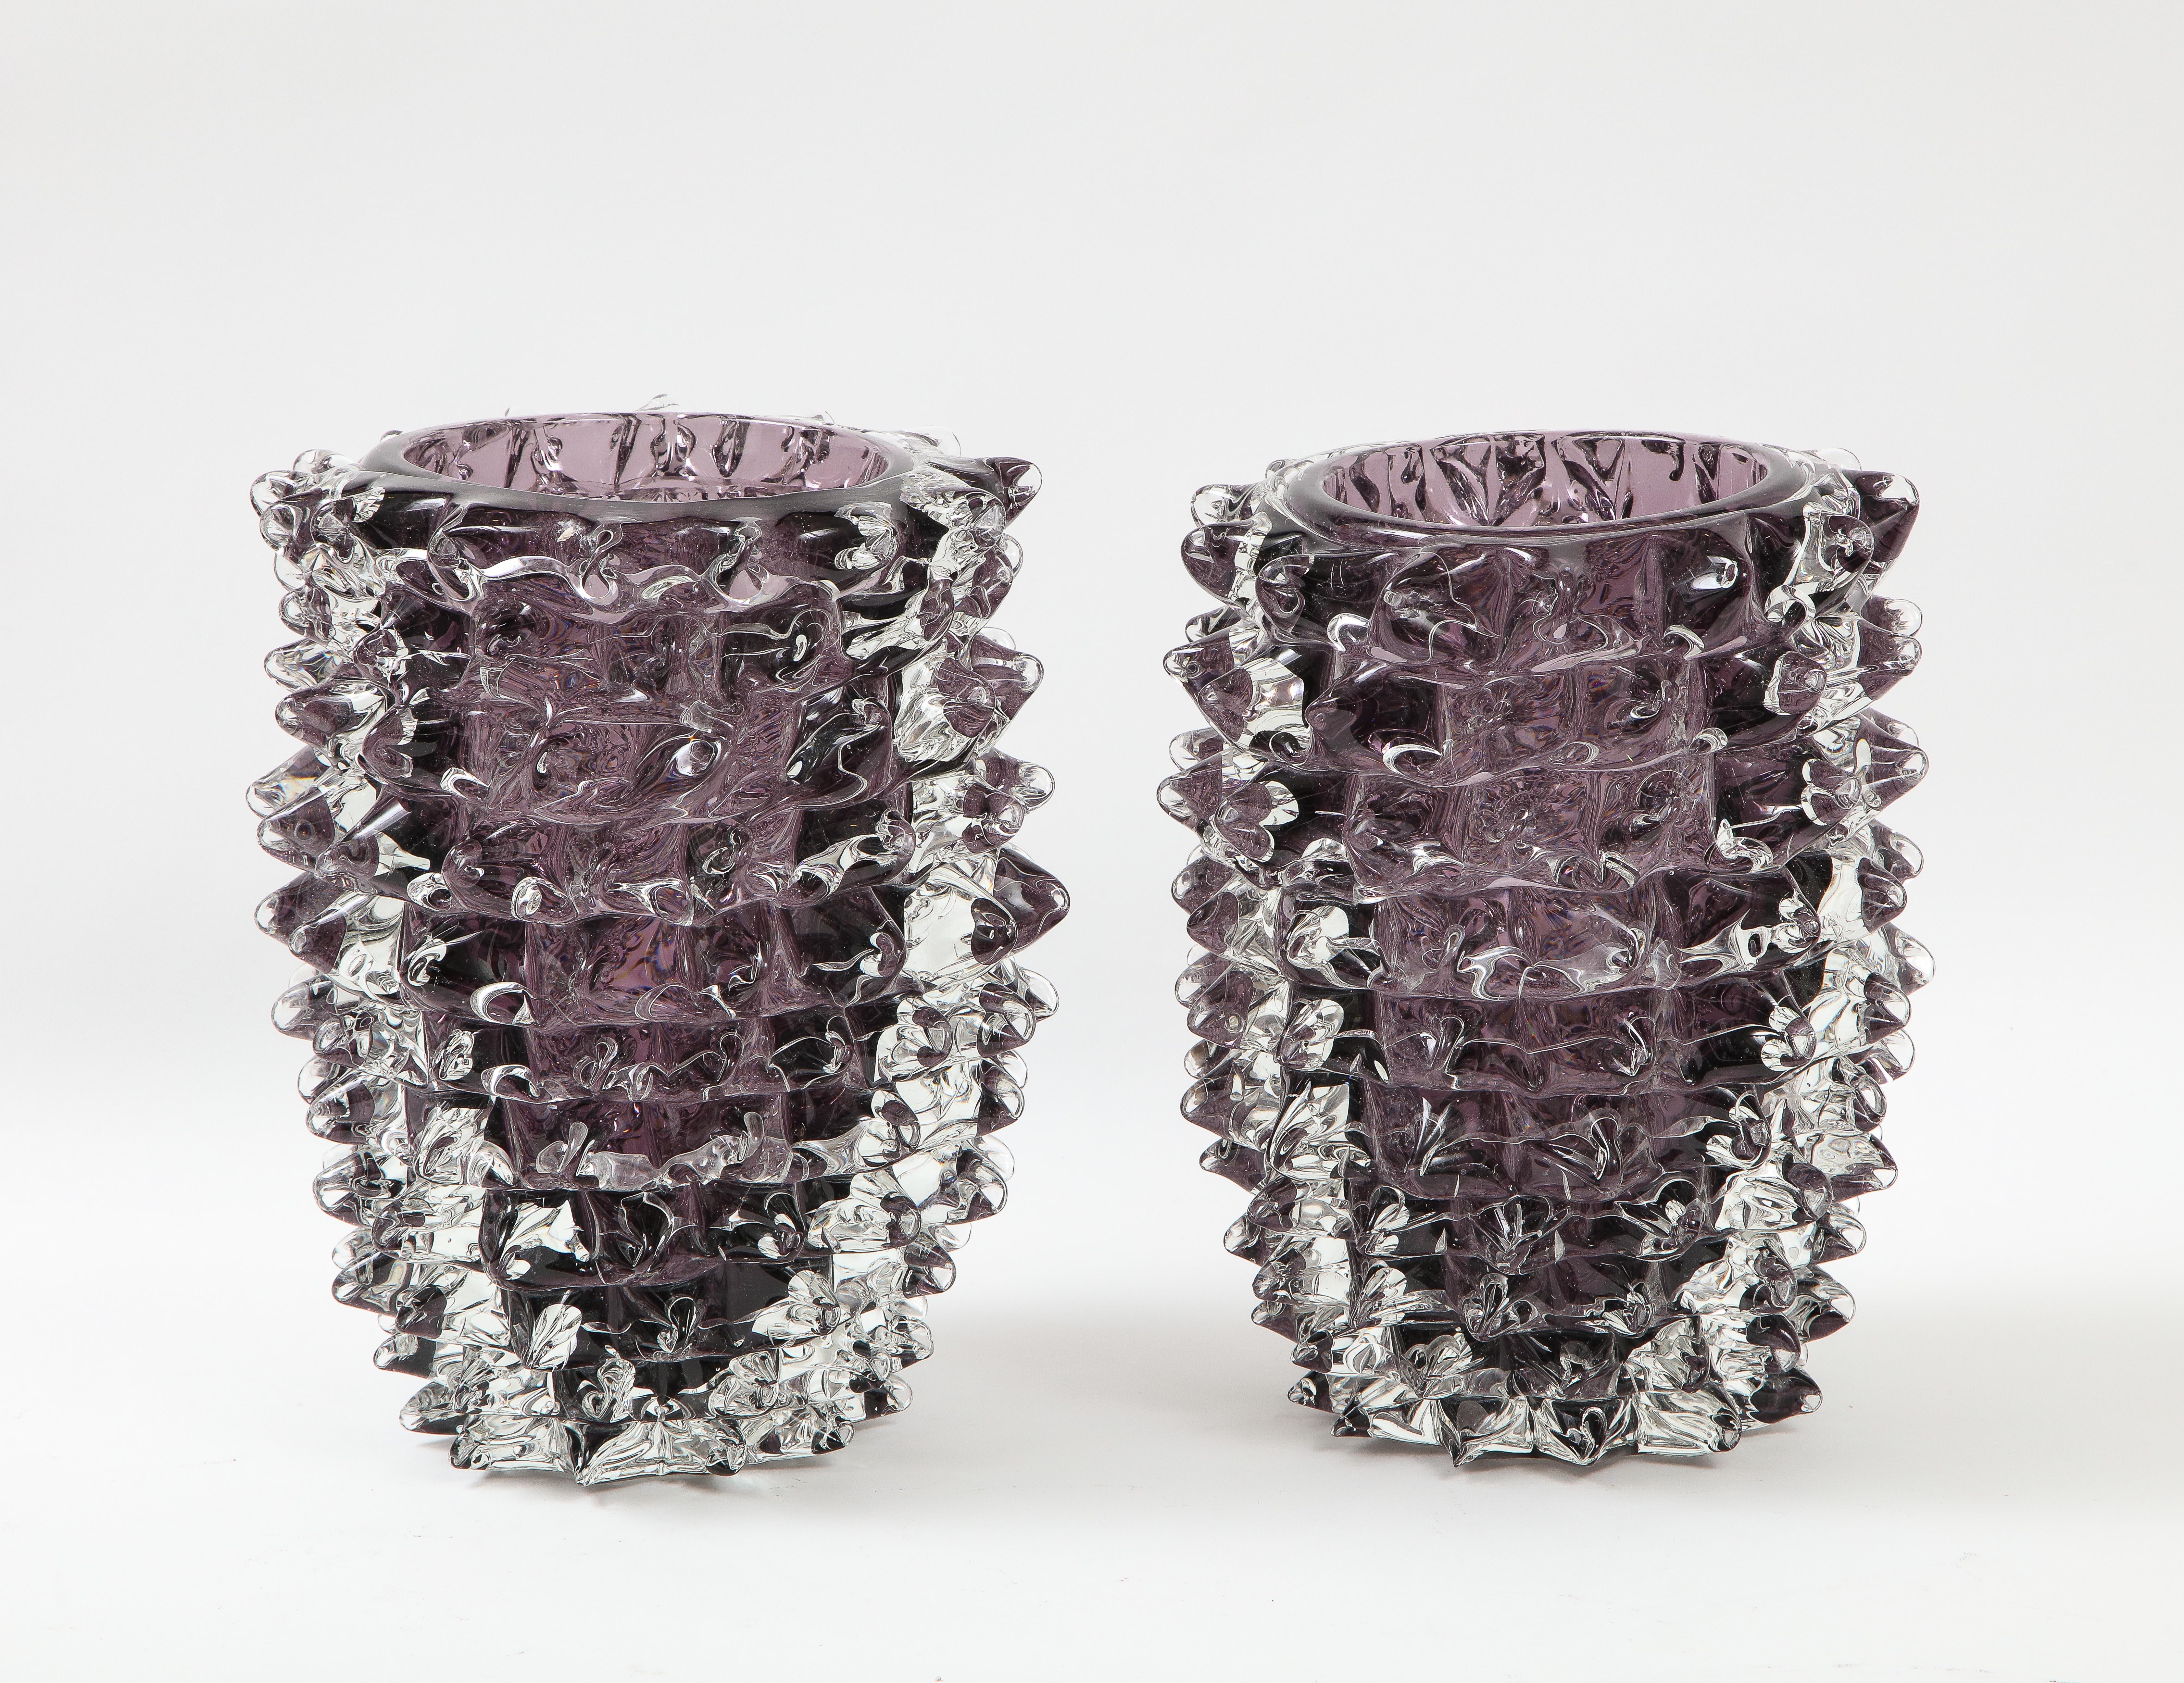 Handblown pair of clear and Amethyst or purple Murano glass vases in the iconic manner of the 